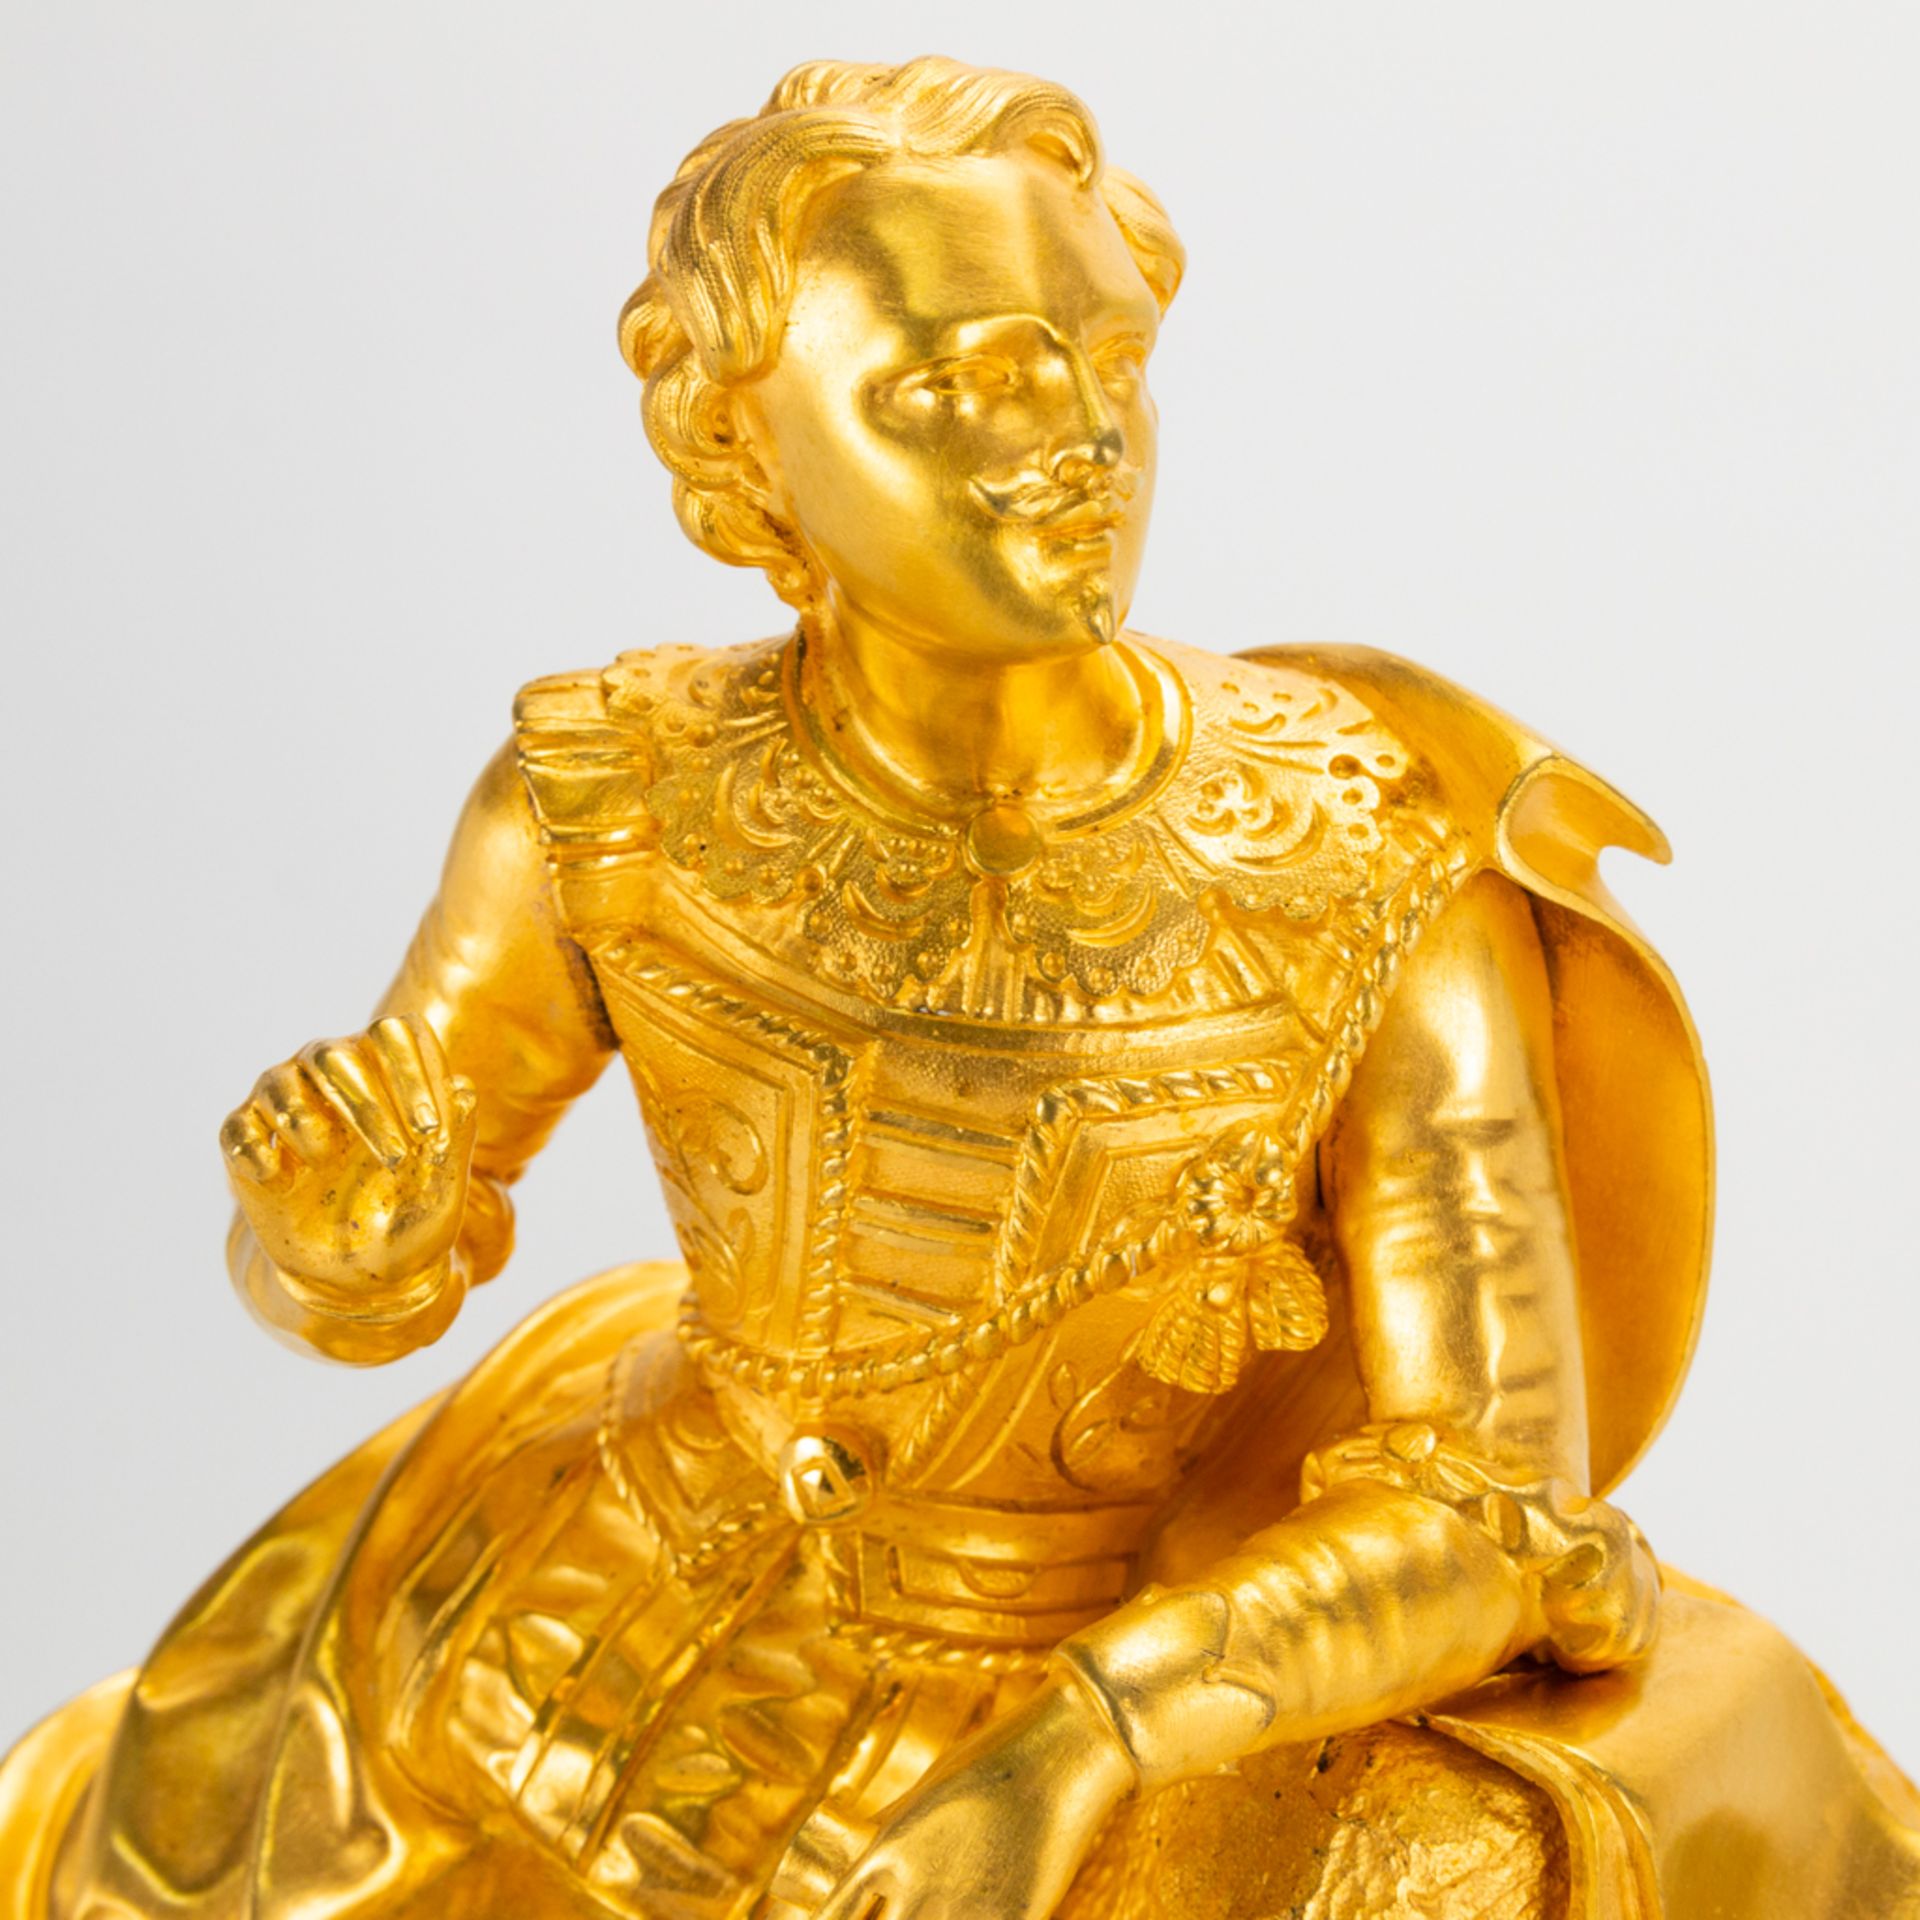 A ormolu gilt table clock made of bronze with a figurine of a noble man, enamel dial and marked Amst - Image 11 of 16